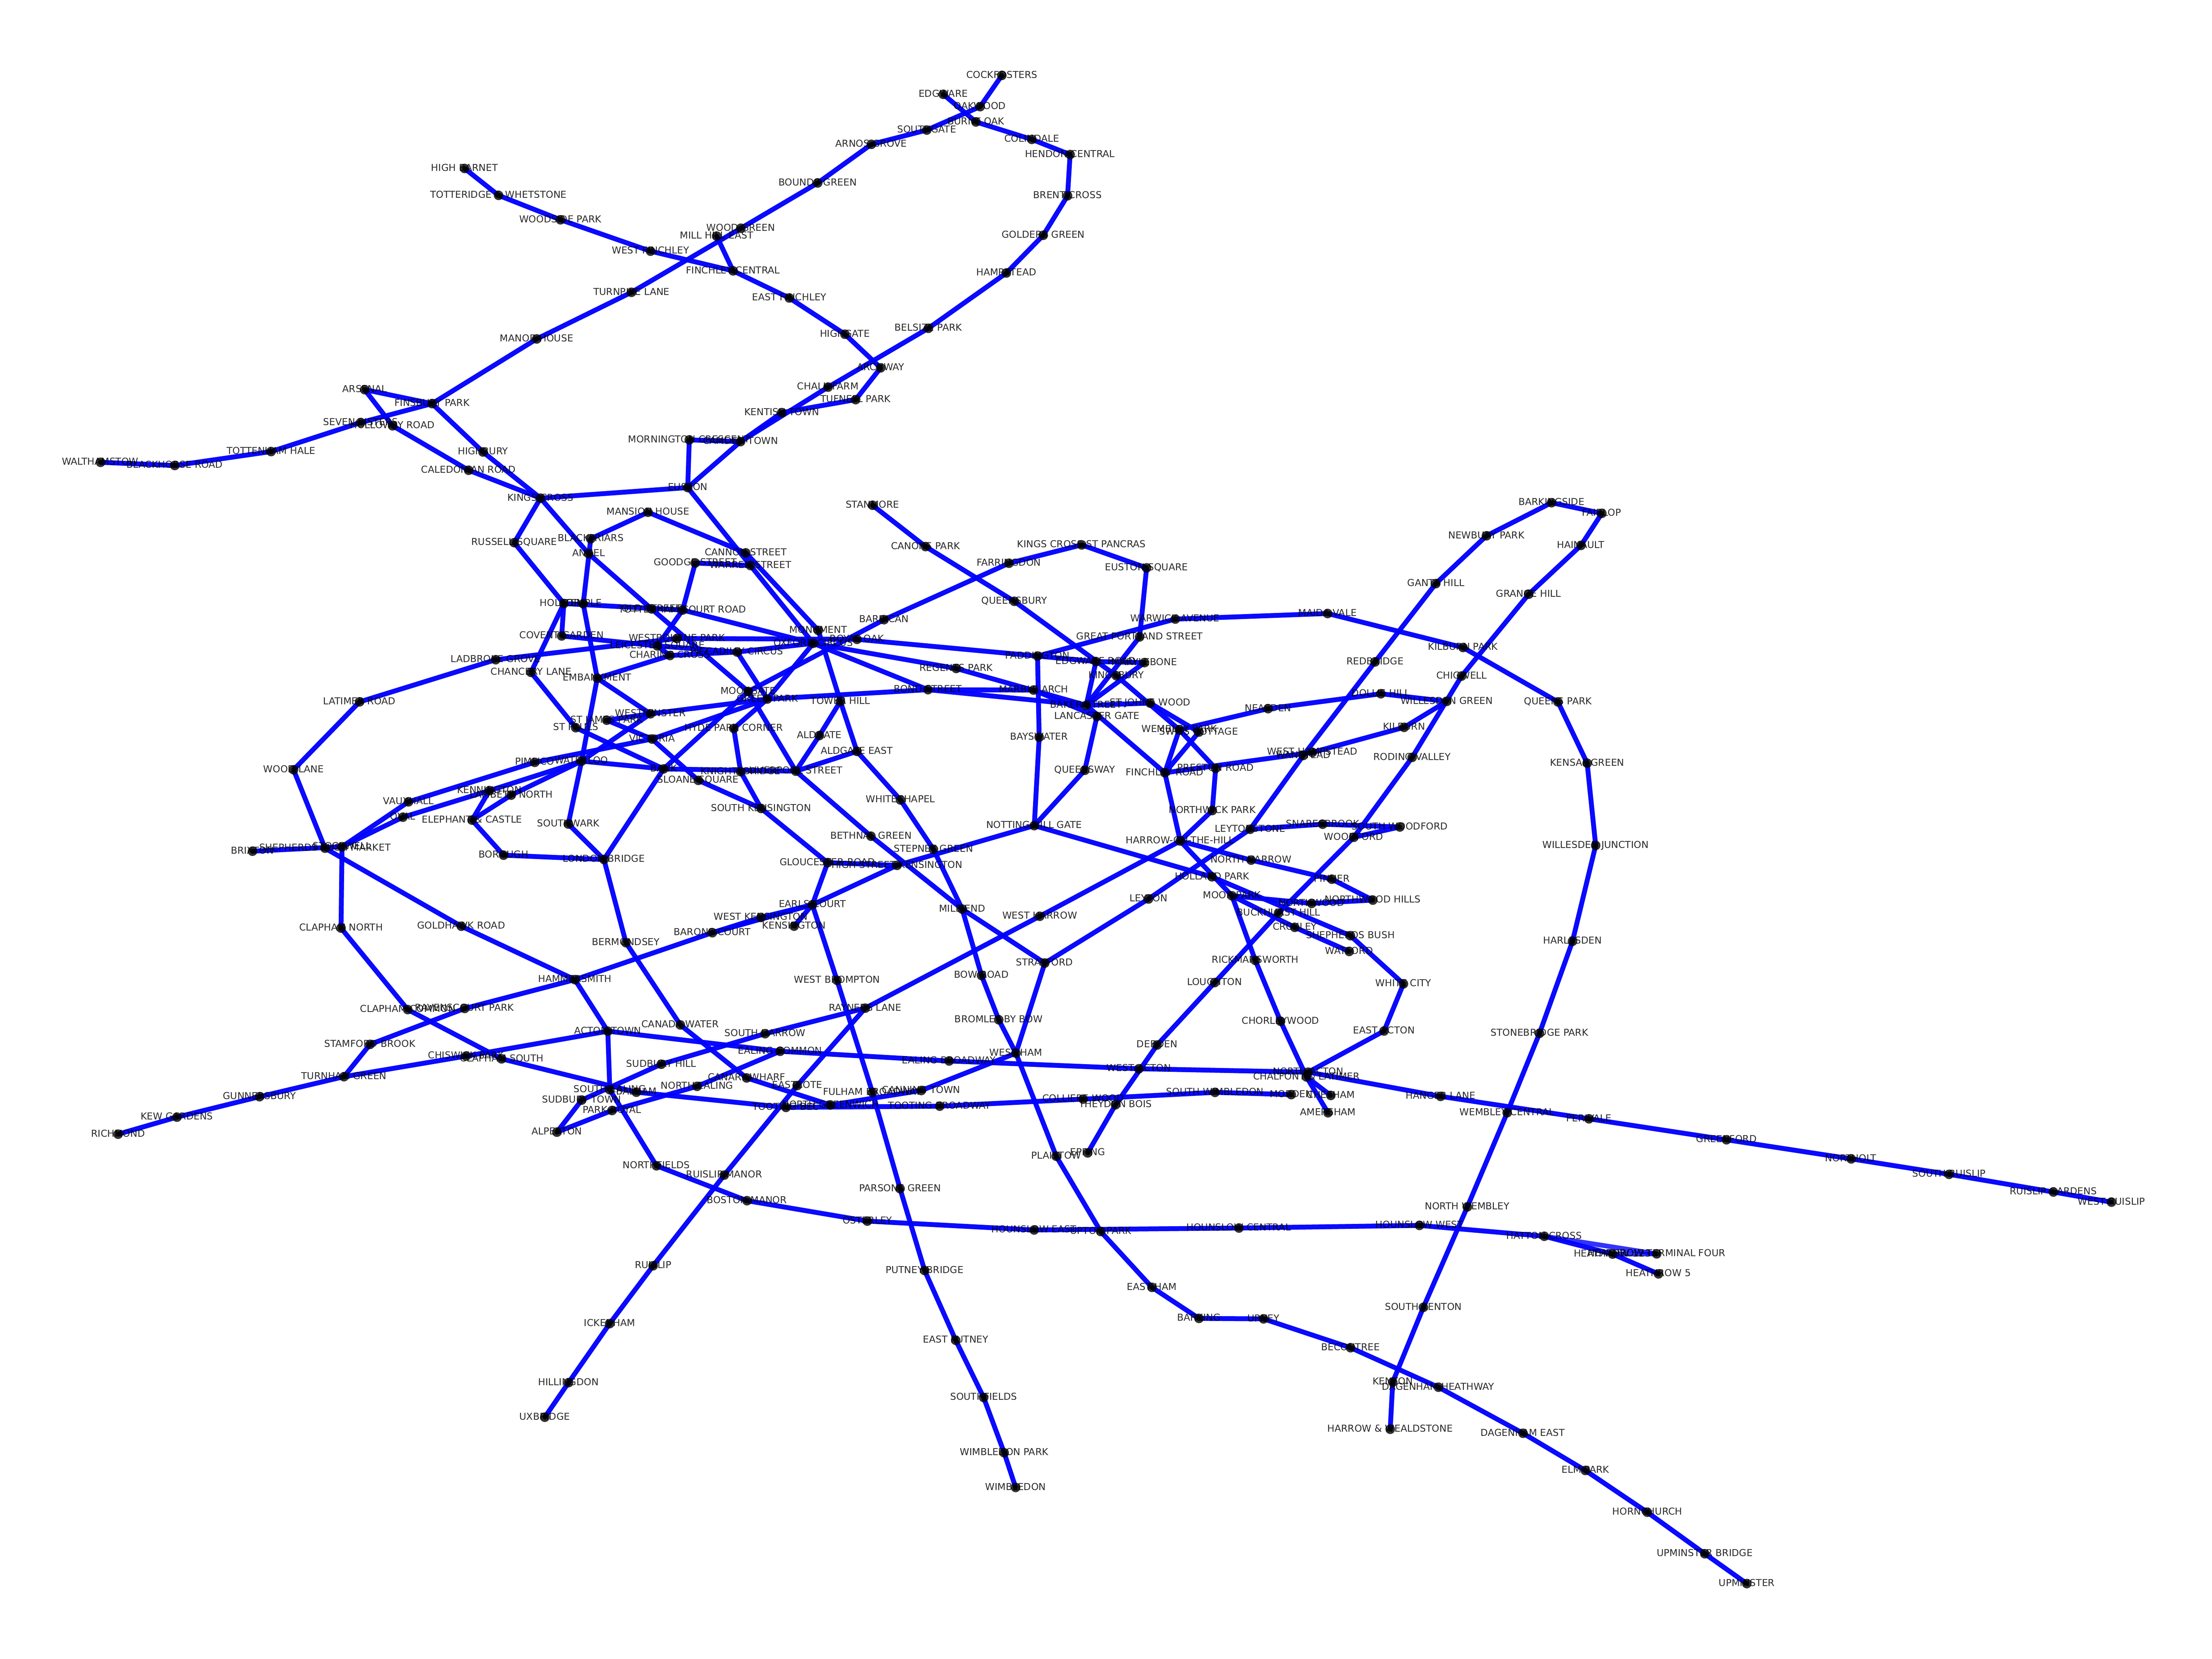 The tube map imported as a graph and visualised using NetworkX